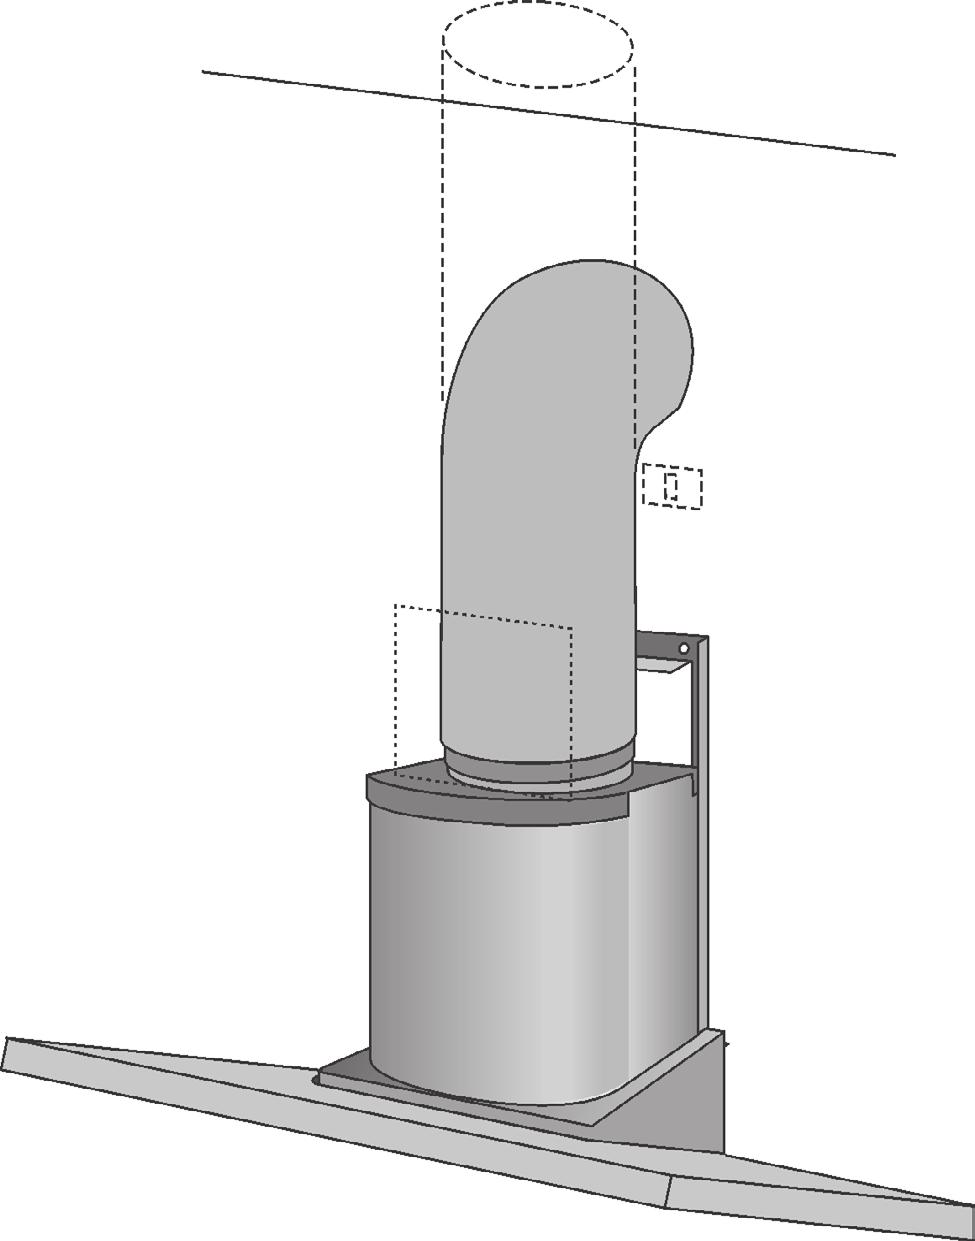 EN 2 / INSTALLING YOUR APPLIANCE FIXING THE TELESCOPIC FLUES Ducting mode - Adjust the width of the support bracket (D) of the telescopic flue by means of the screws (E) as shown in Fig.8.